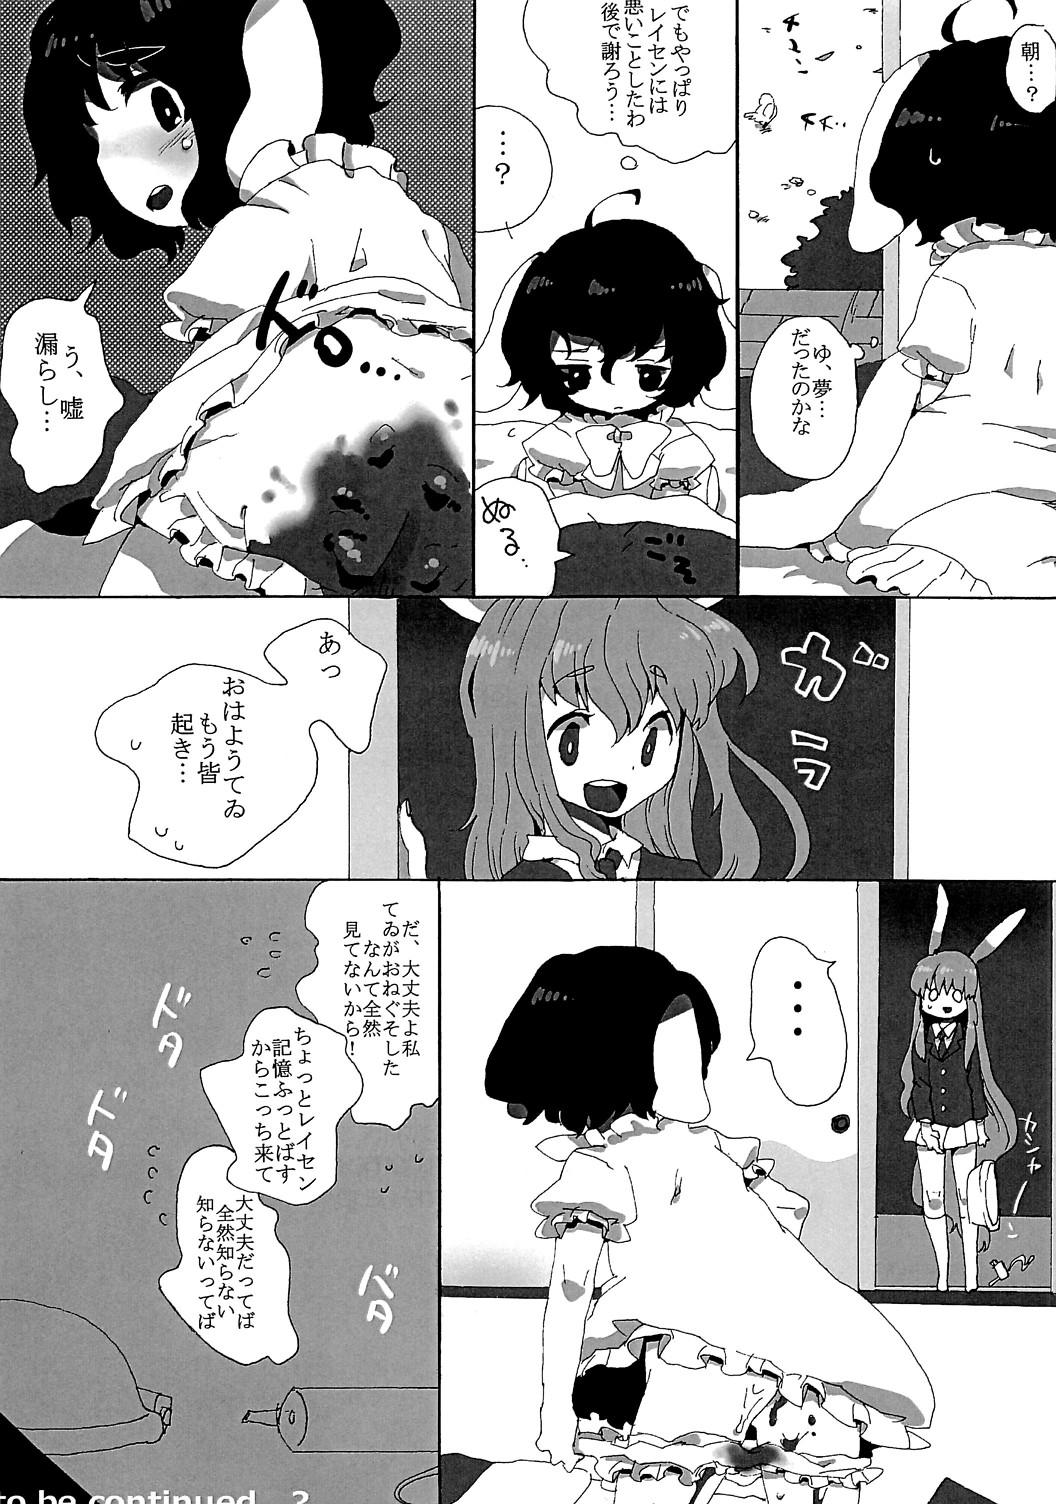 Hentai rumor the second - Touhou project Stepson - Page 12